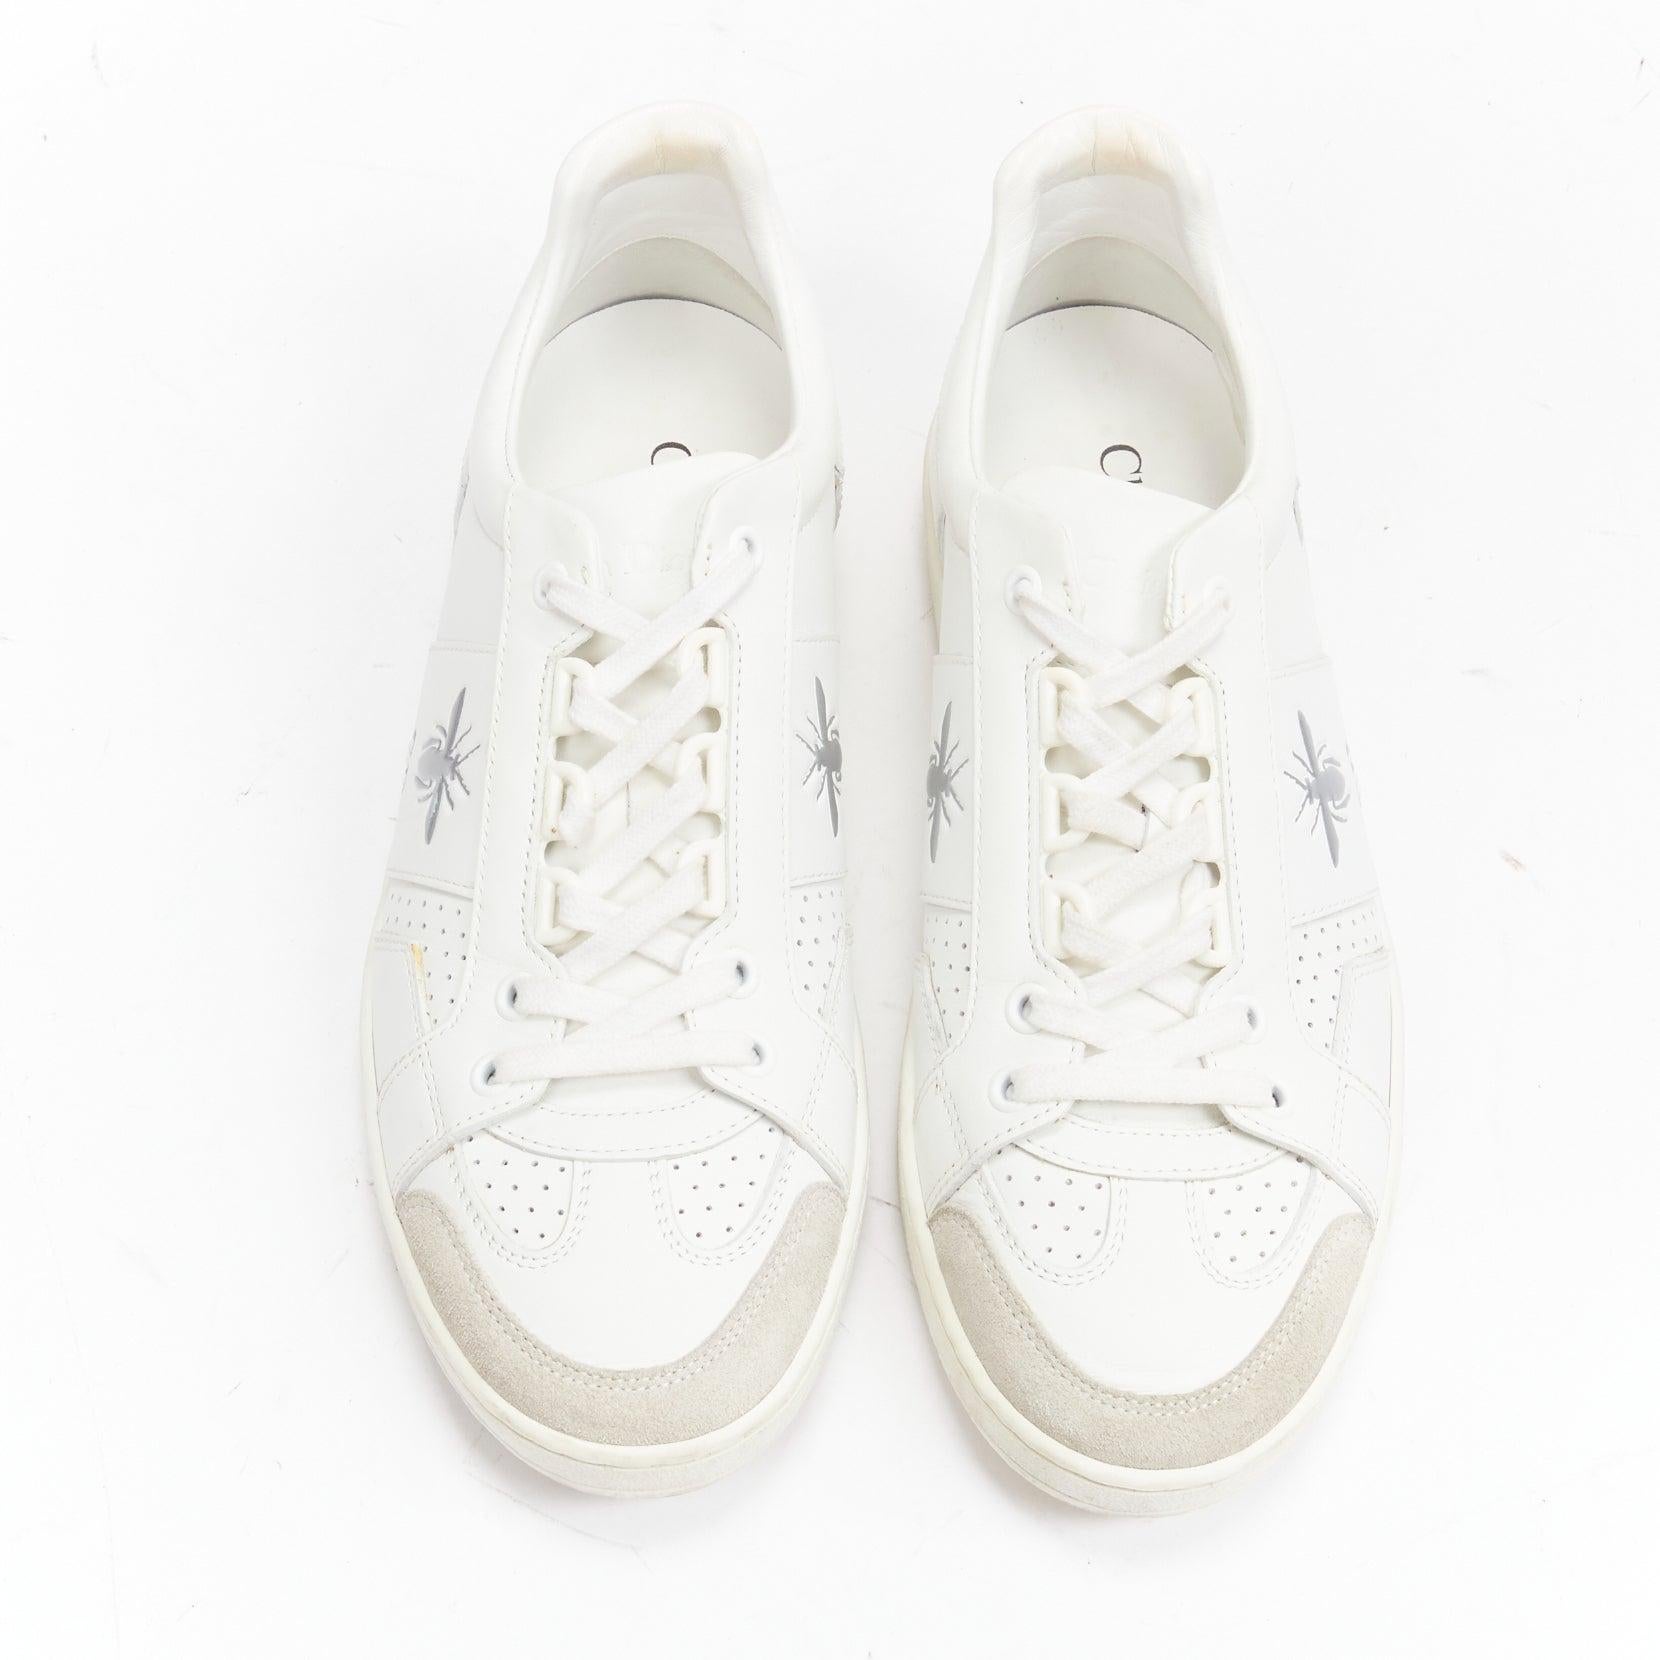 CHRISTIAN DIOR D Bee silver CD embossed leather panelled sneakers EU37
Reference: LNKO/A02204
Brand: Christian Dior
Designer: Maria Grazia Chiuri
Model: D Bee
Material: Leather
Color: White, Silver
Pattern: Solid
Closure: Lace Up
Lining: White